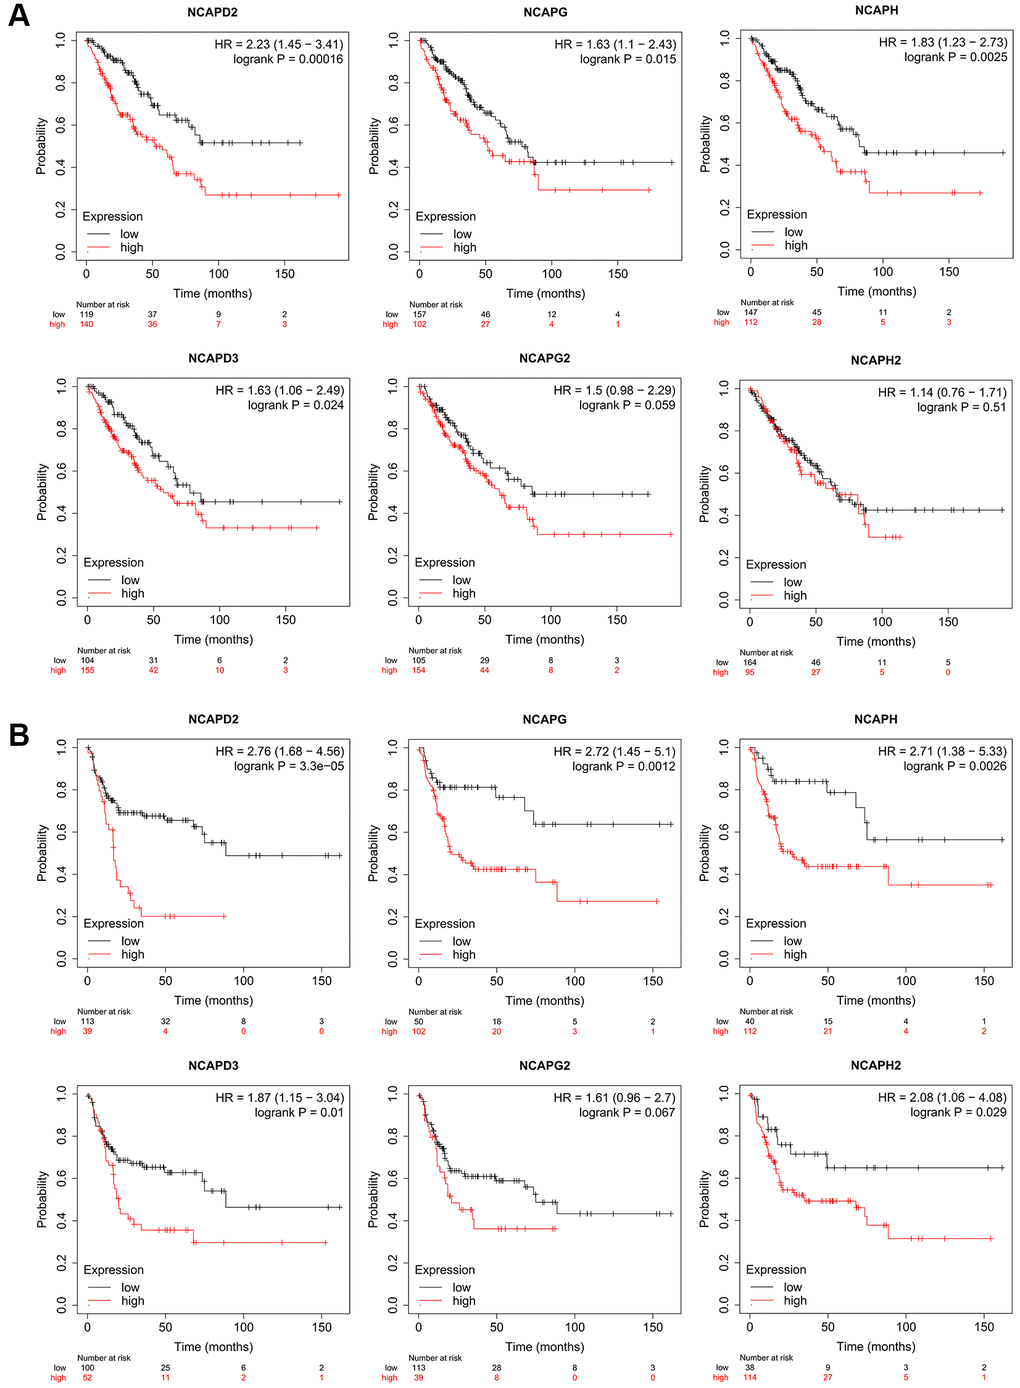 The prognostic value of mRNA level of NCAP factors in sarcoma patients. The prognostic value of mRNA level of NCAP factors in sarcoma patients was analyzed by Kaplan Meier Plotter. Expression of NCAP family genes was related to poor (A) overall survival and (B) relapse-free survival in sarcoma.